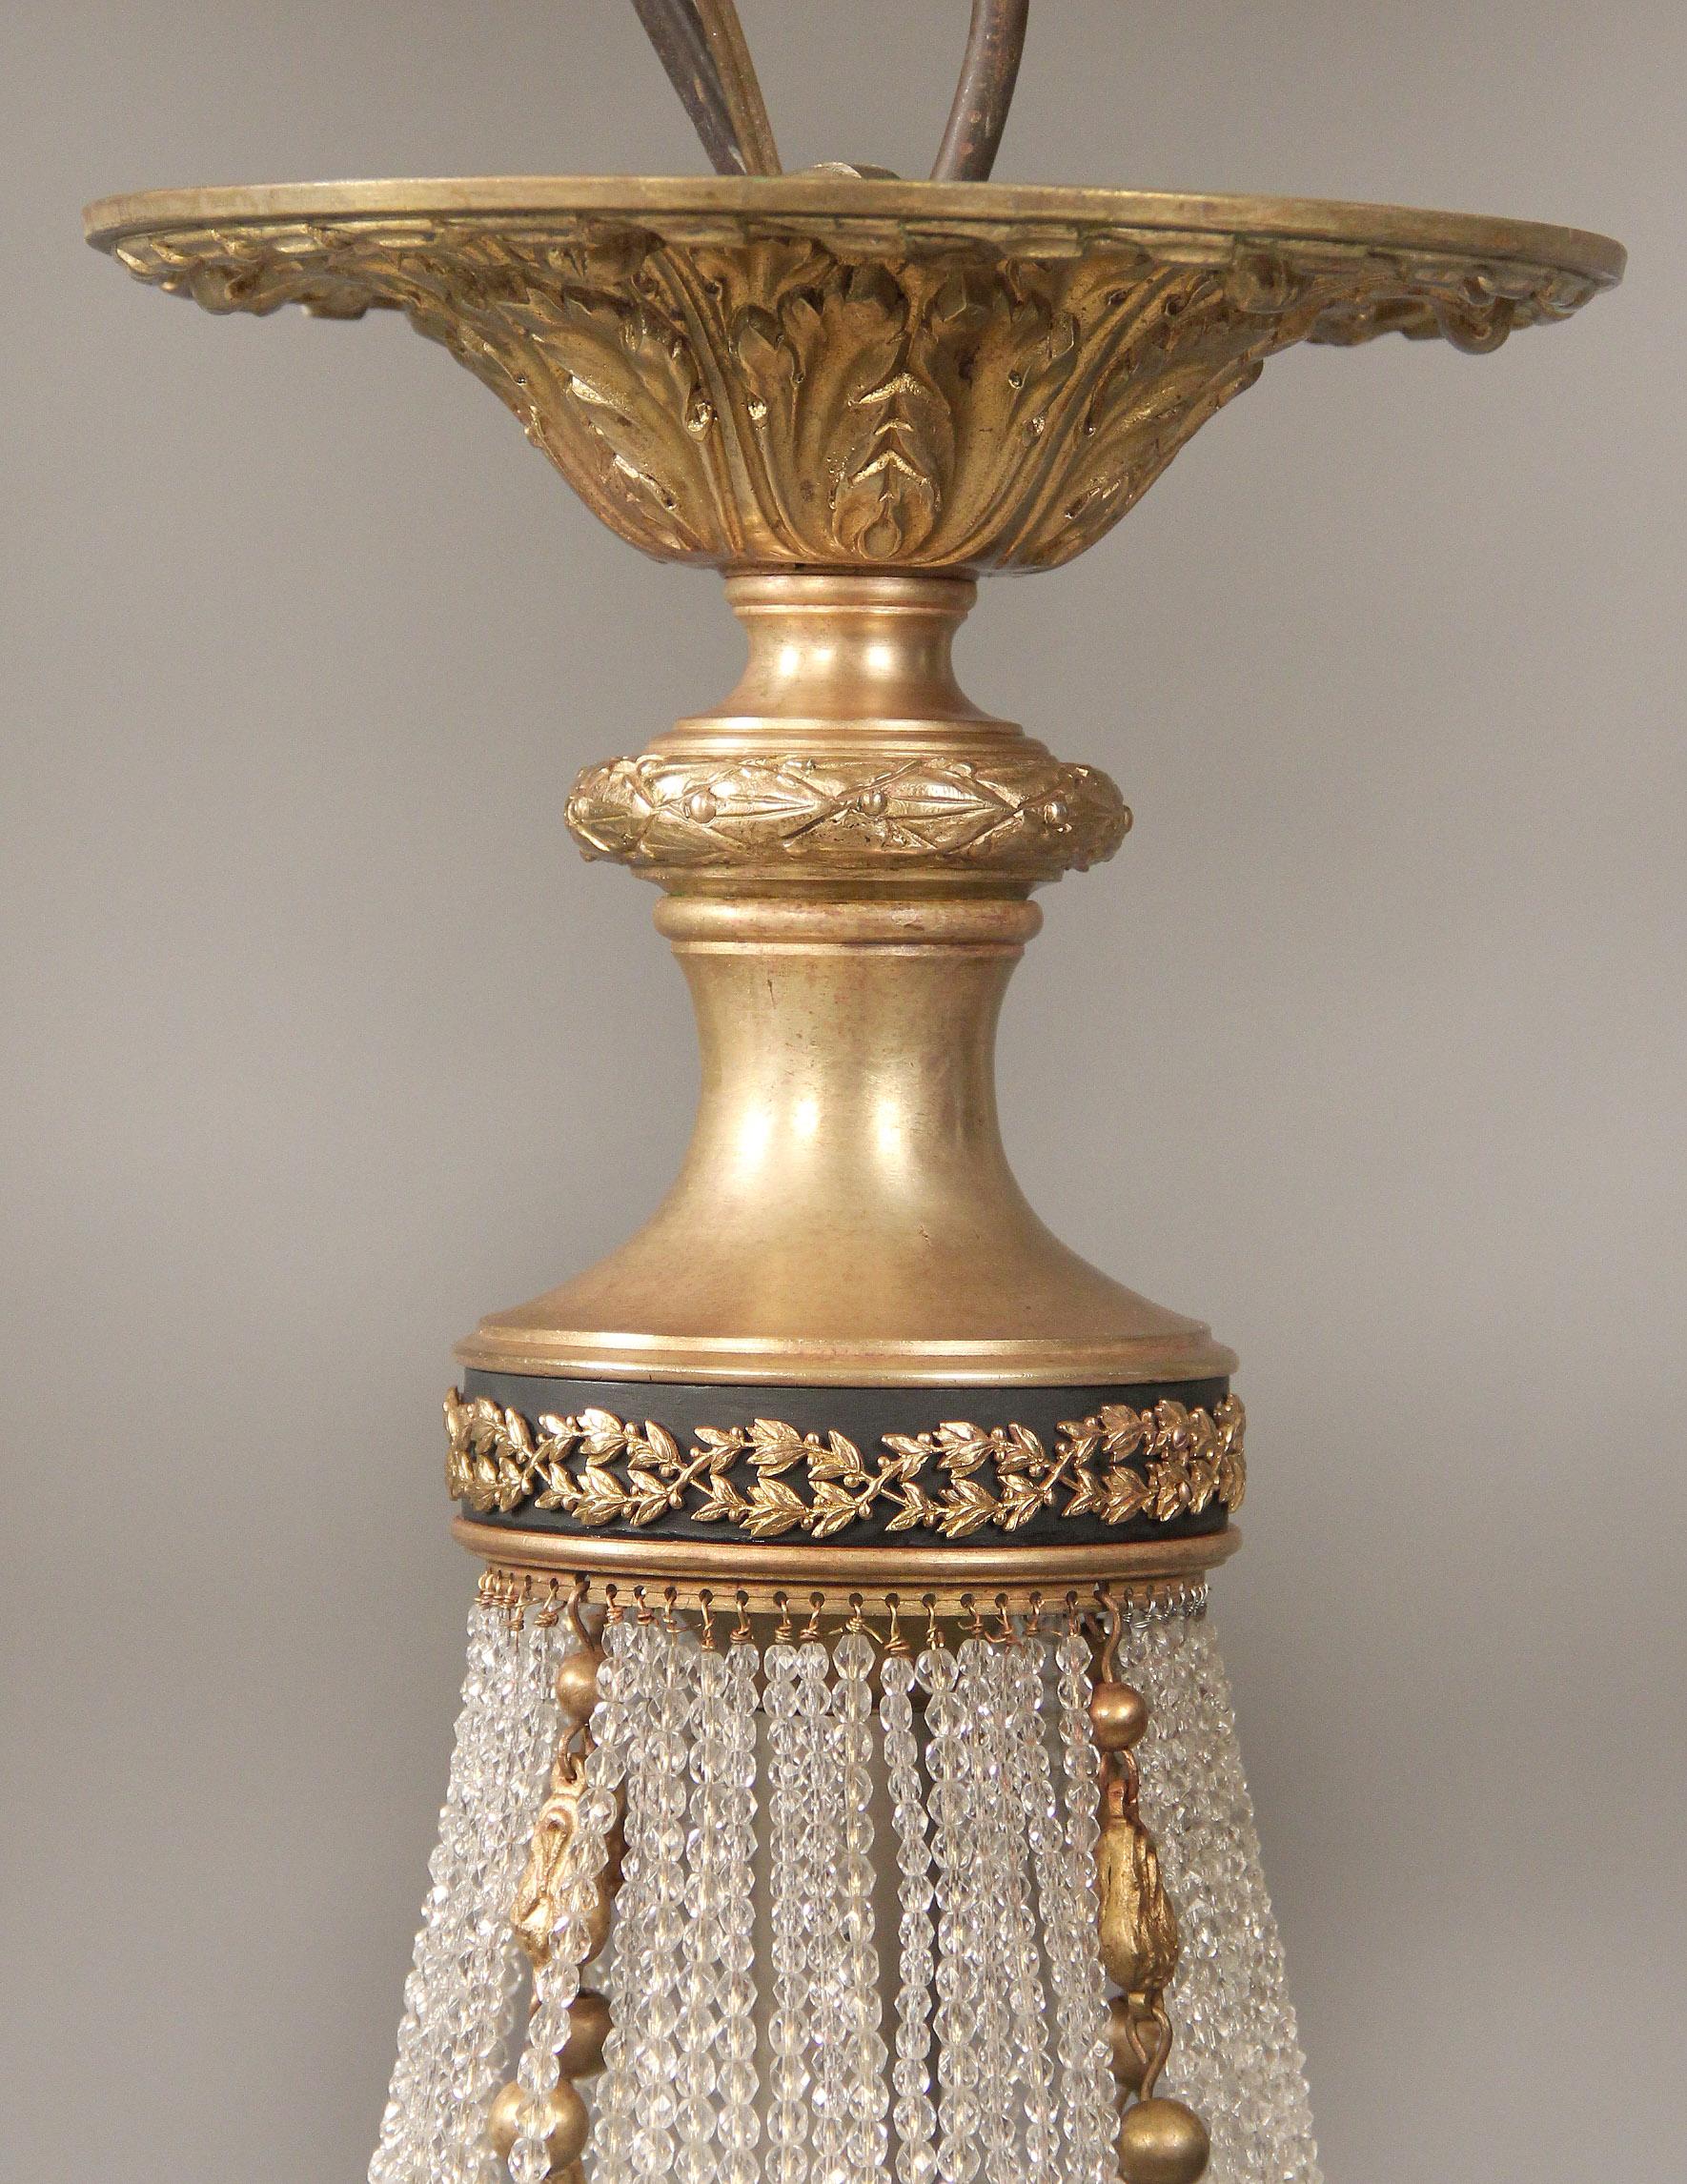 Late 19th-early 20th century gilt bronze beaded basket twelve-light chandelier.

The upper and lower part of the cage connected by ribbed bronze straps, four perimeter lights with frosted rose shades and eight tiered interior lights.